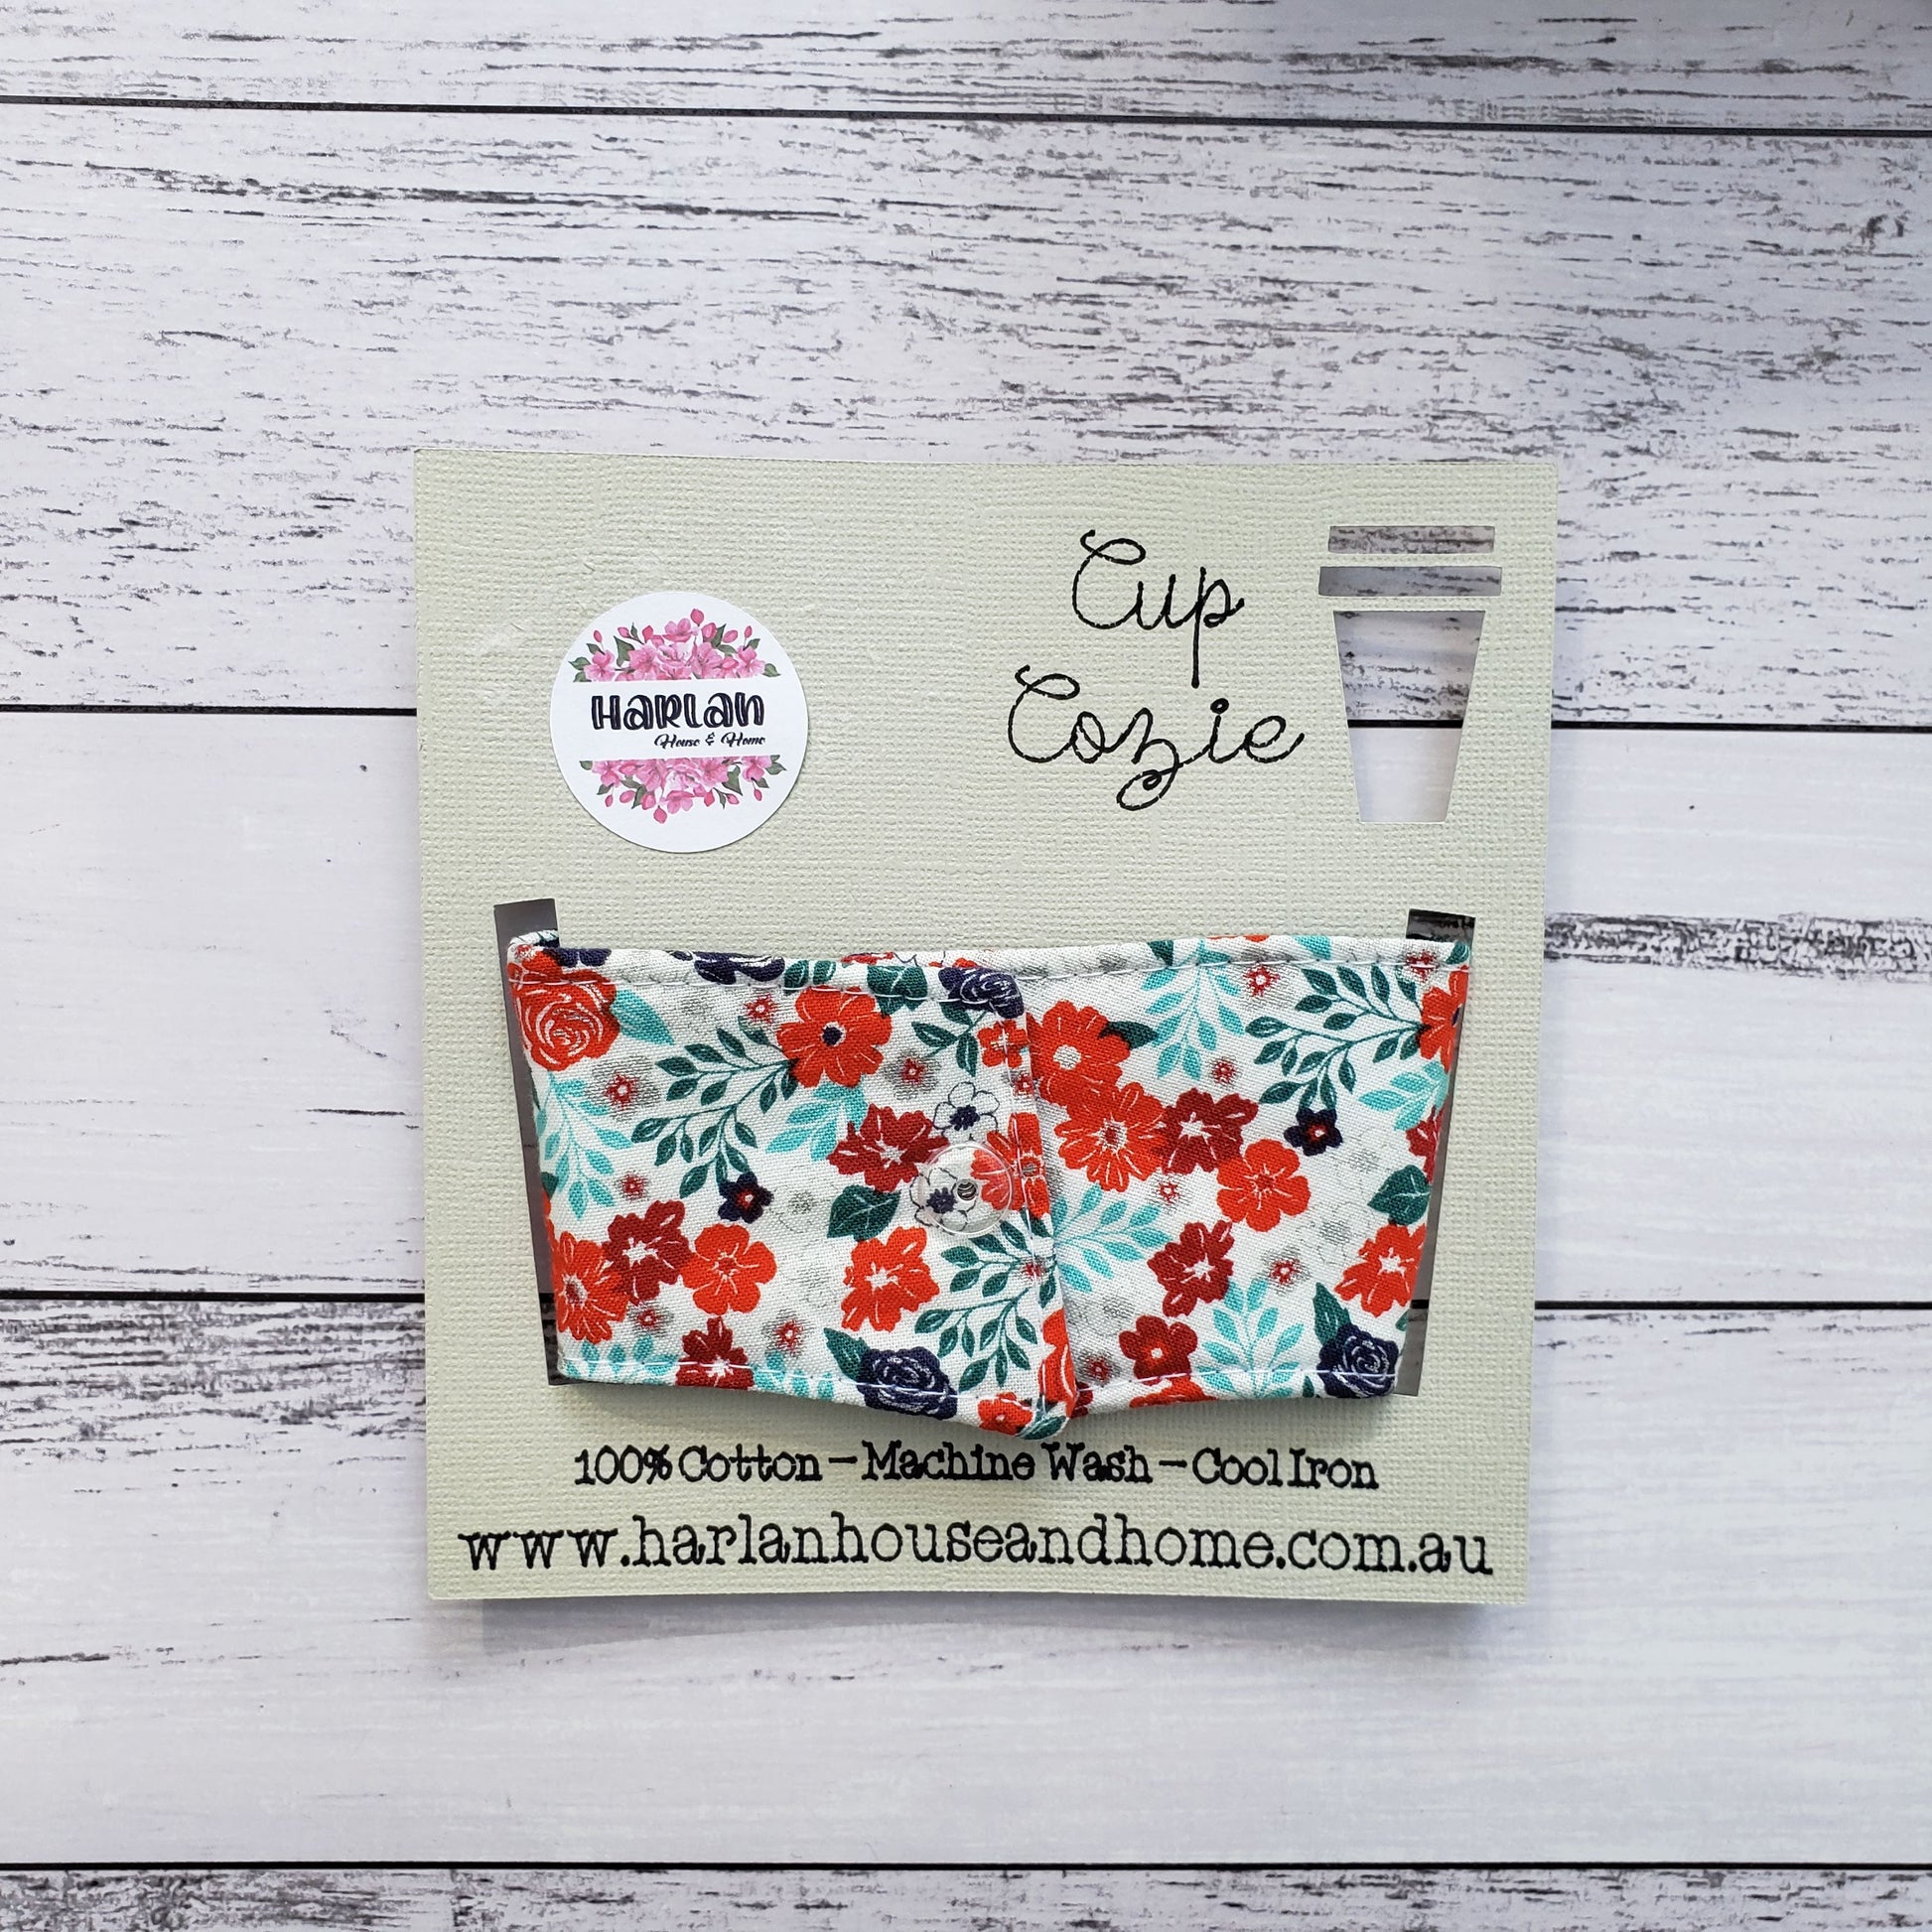 Cup Cozie: Denim cotton / Sparkle, red & blue flowers - Harlan House & Home